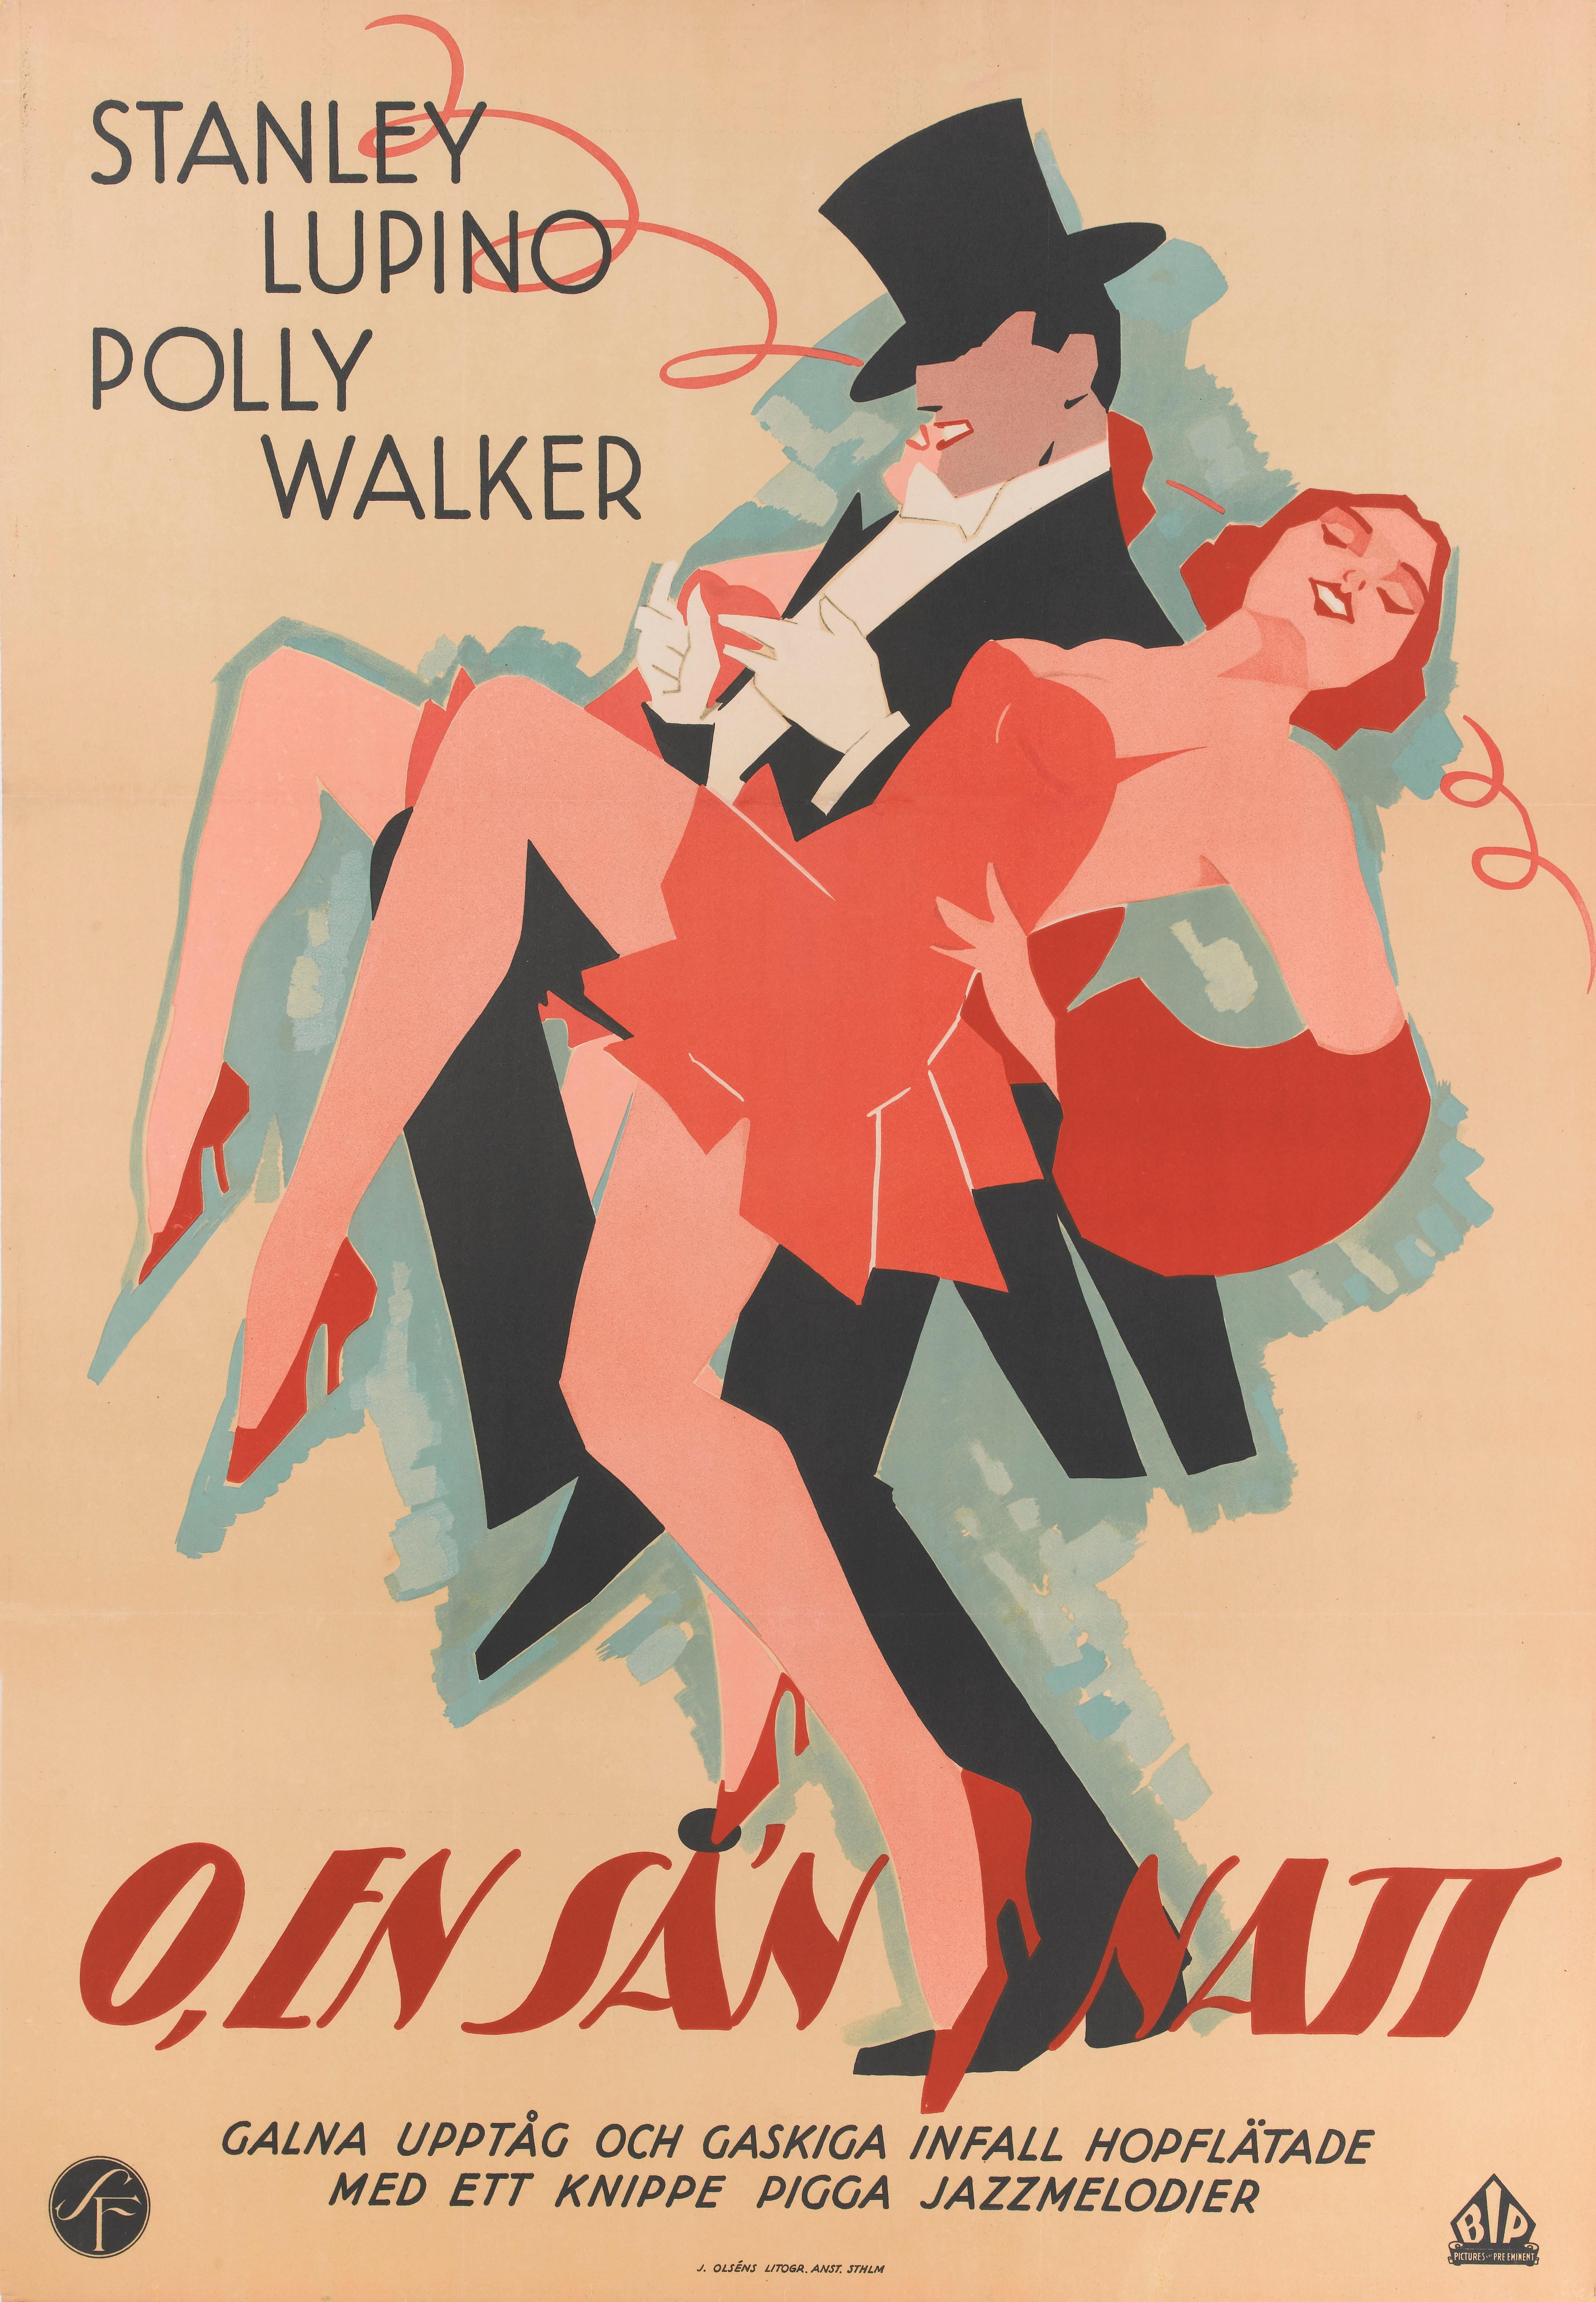 Original Swedish film poster for American 1932 musical Sleepless Nights.
The film was directed by Thomas Bentley starred Stanley Lupino and Polly Walker.
This beautiful Swedish poster was created for the films first Swedish release in 1933.
This